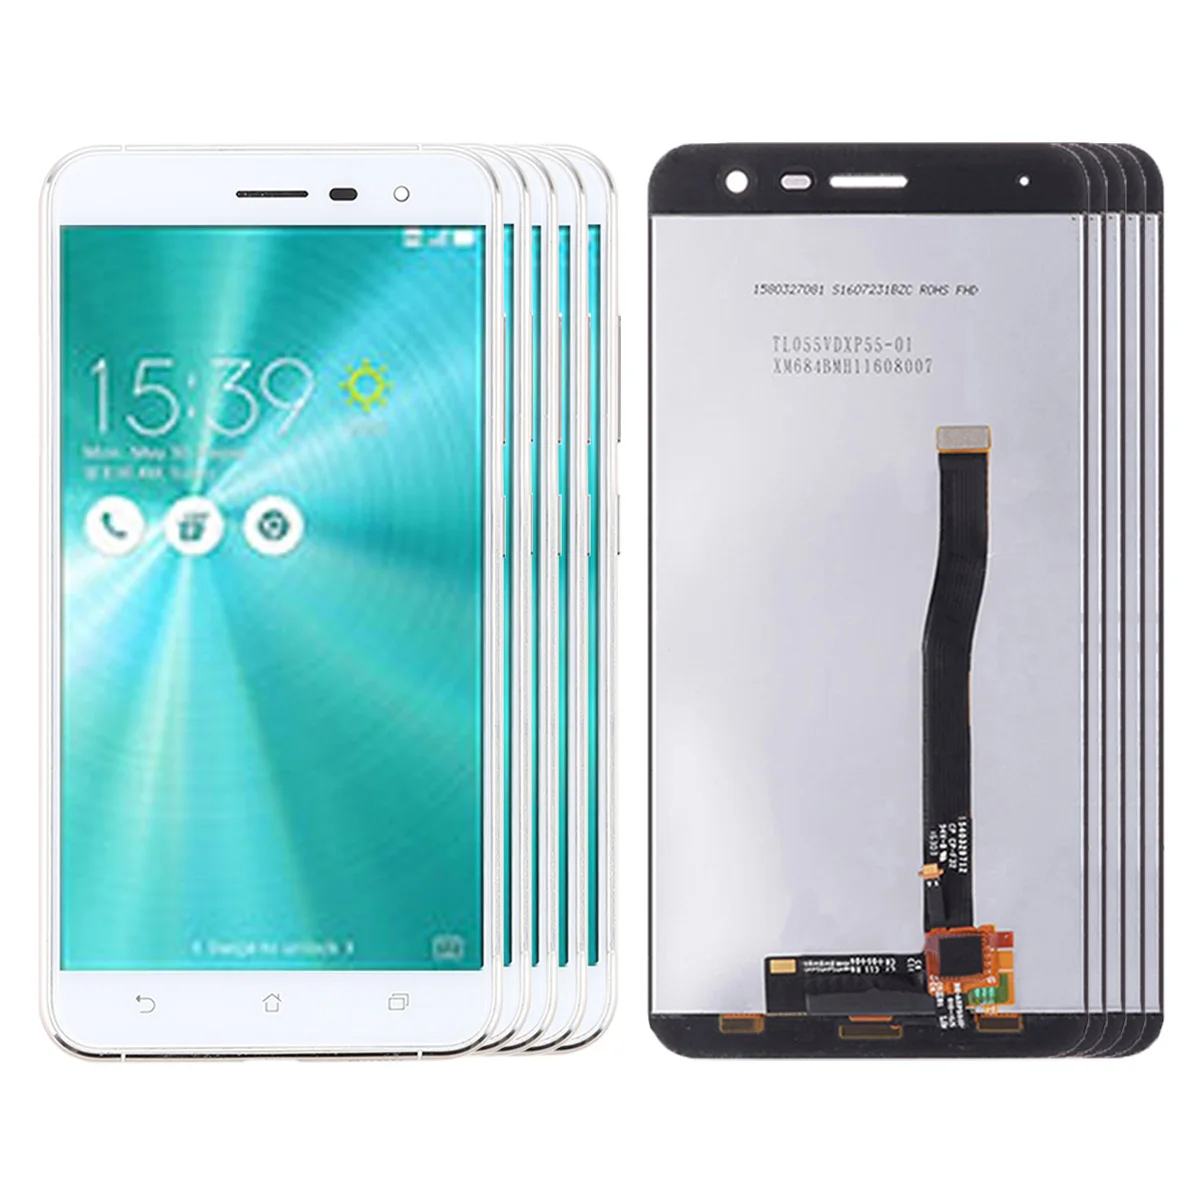 Wholesale 3/5 PCS Display For Asus ZenFone 3 ZE552KL Z012D Z012DC Z012DA With Frame LCD + Touch Screen Digitizer Assembly Parts enlarge